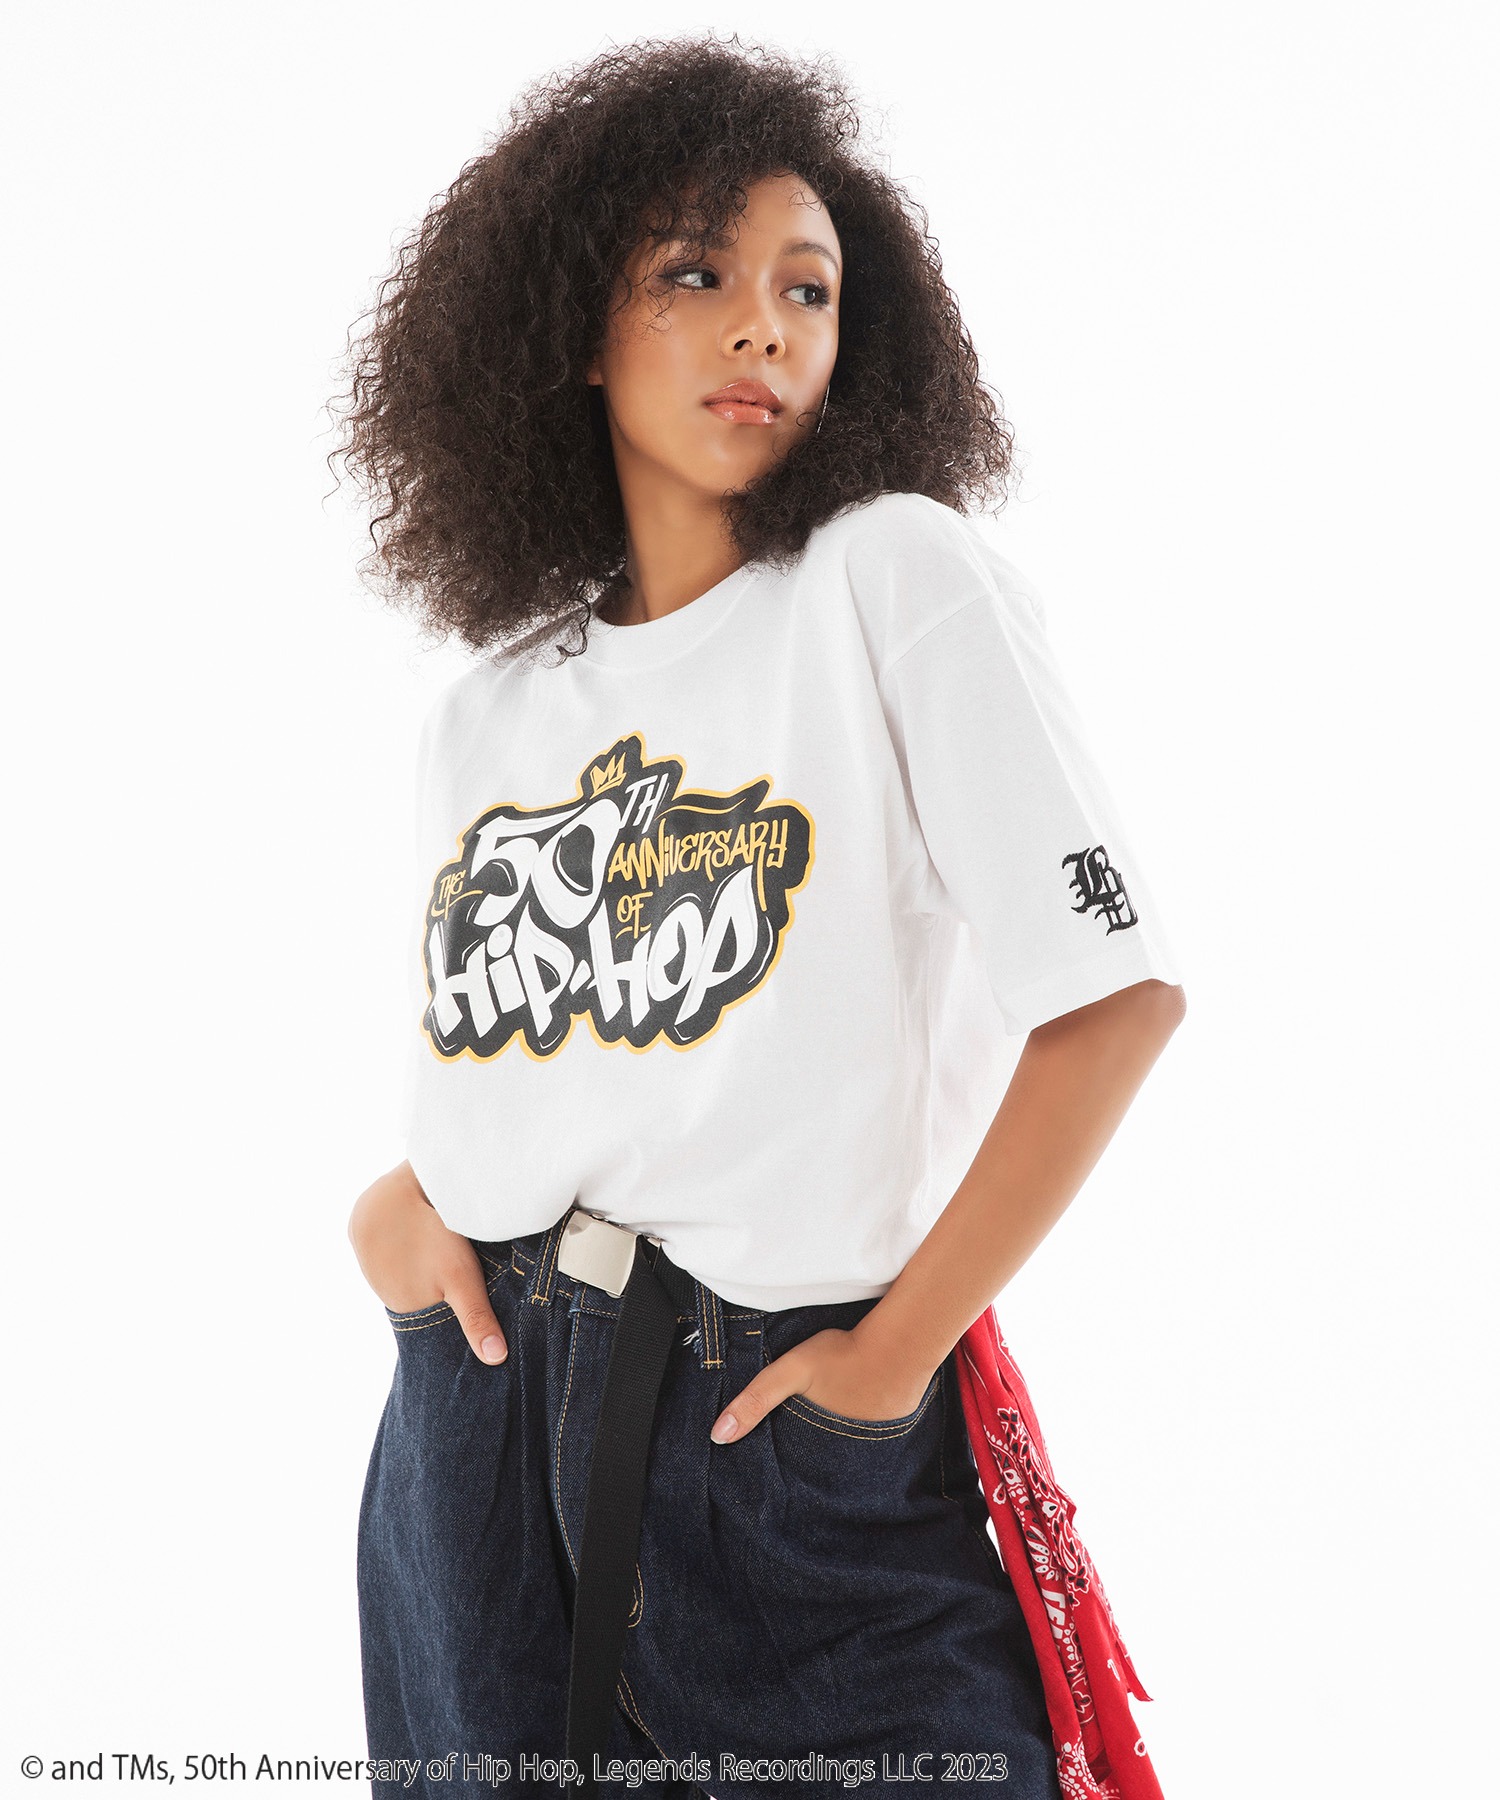 The 50th Anniversary of HIP HOP】アニバーサリーTシャツ BACK TO THE